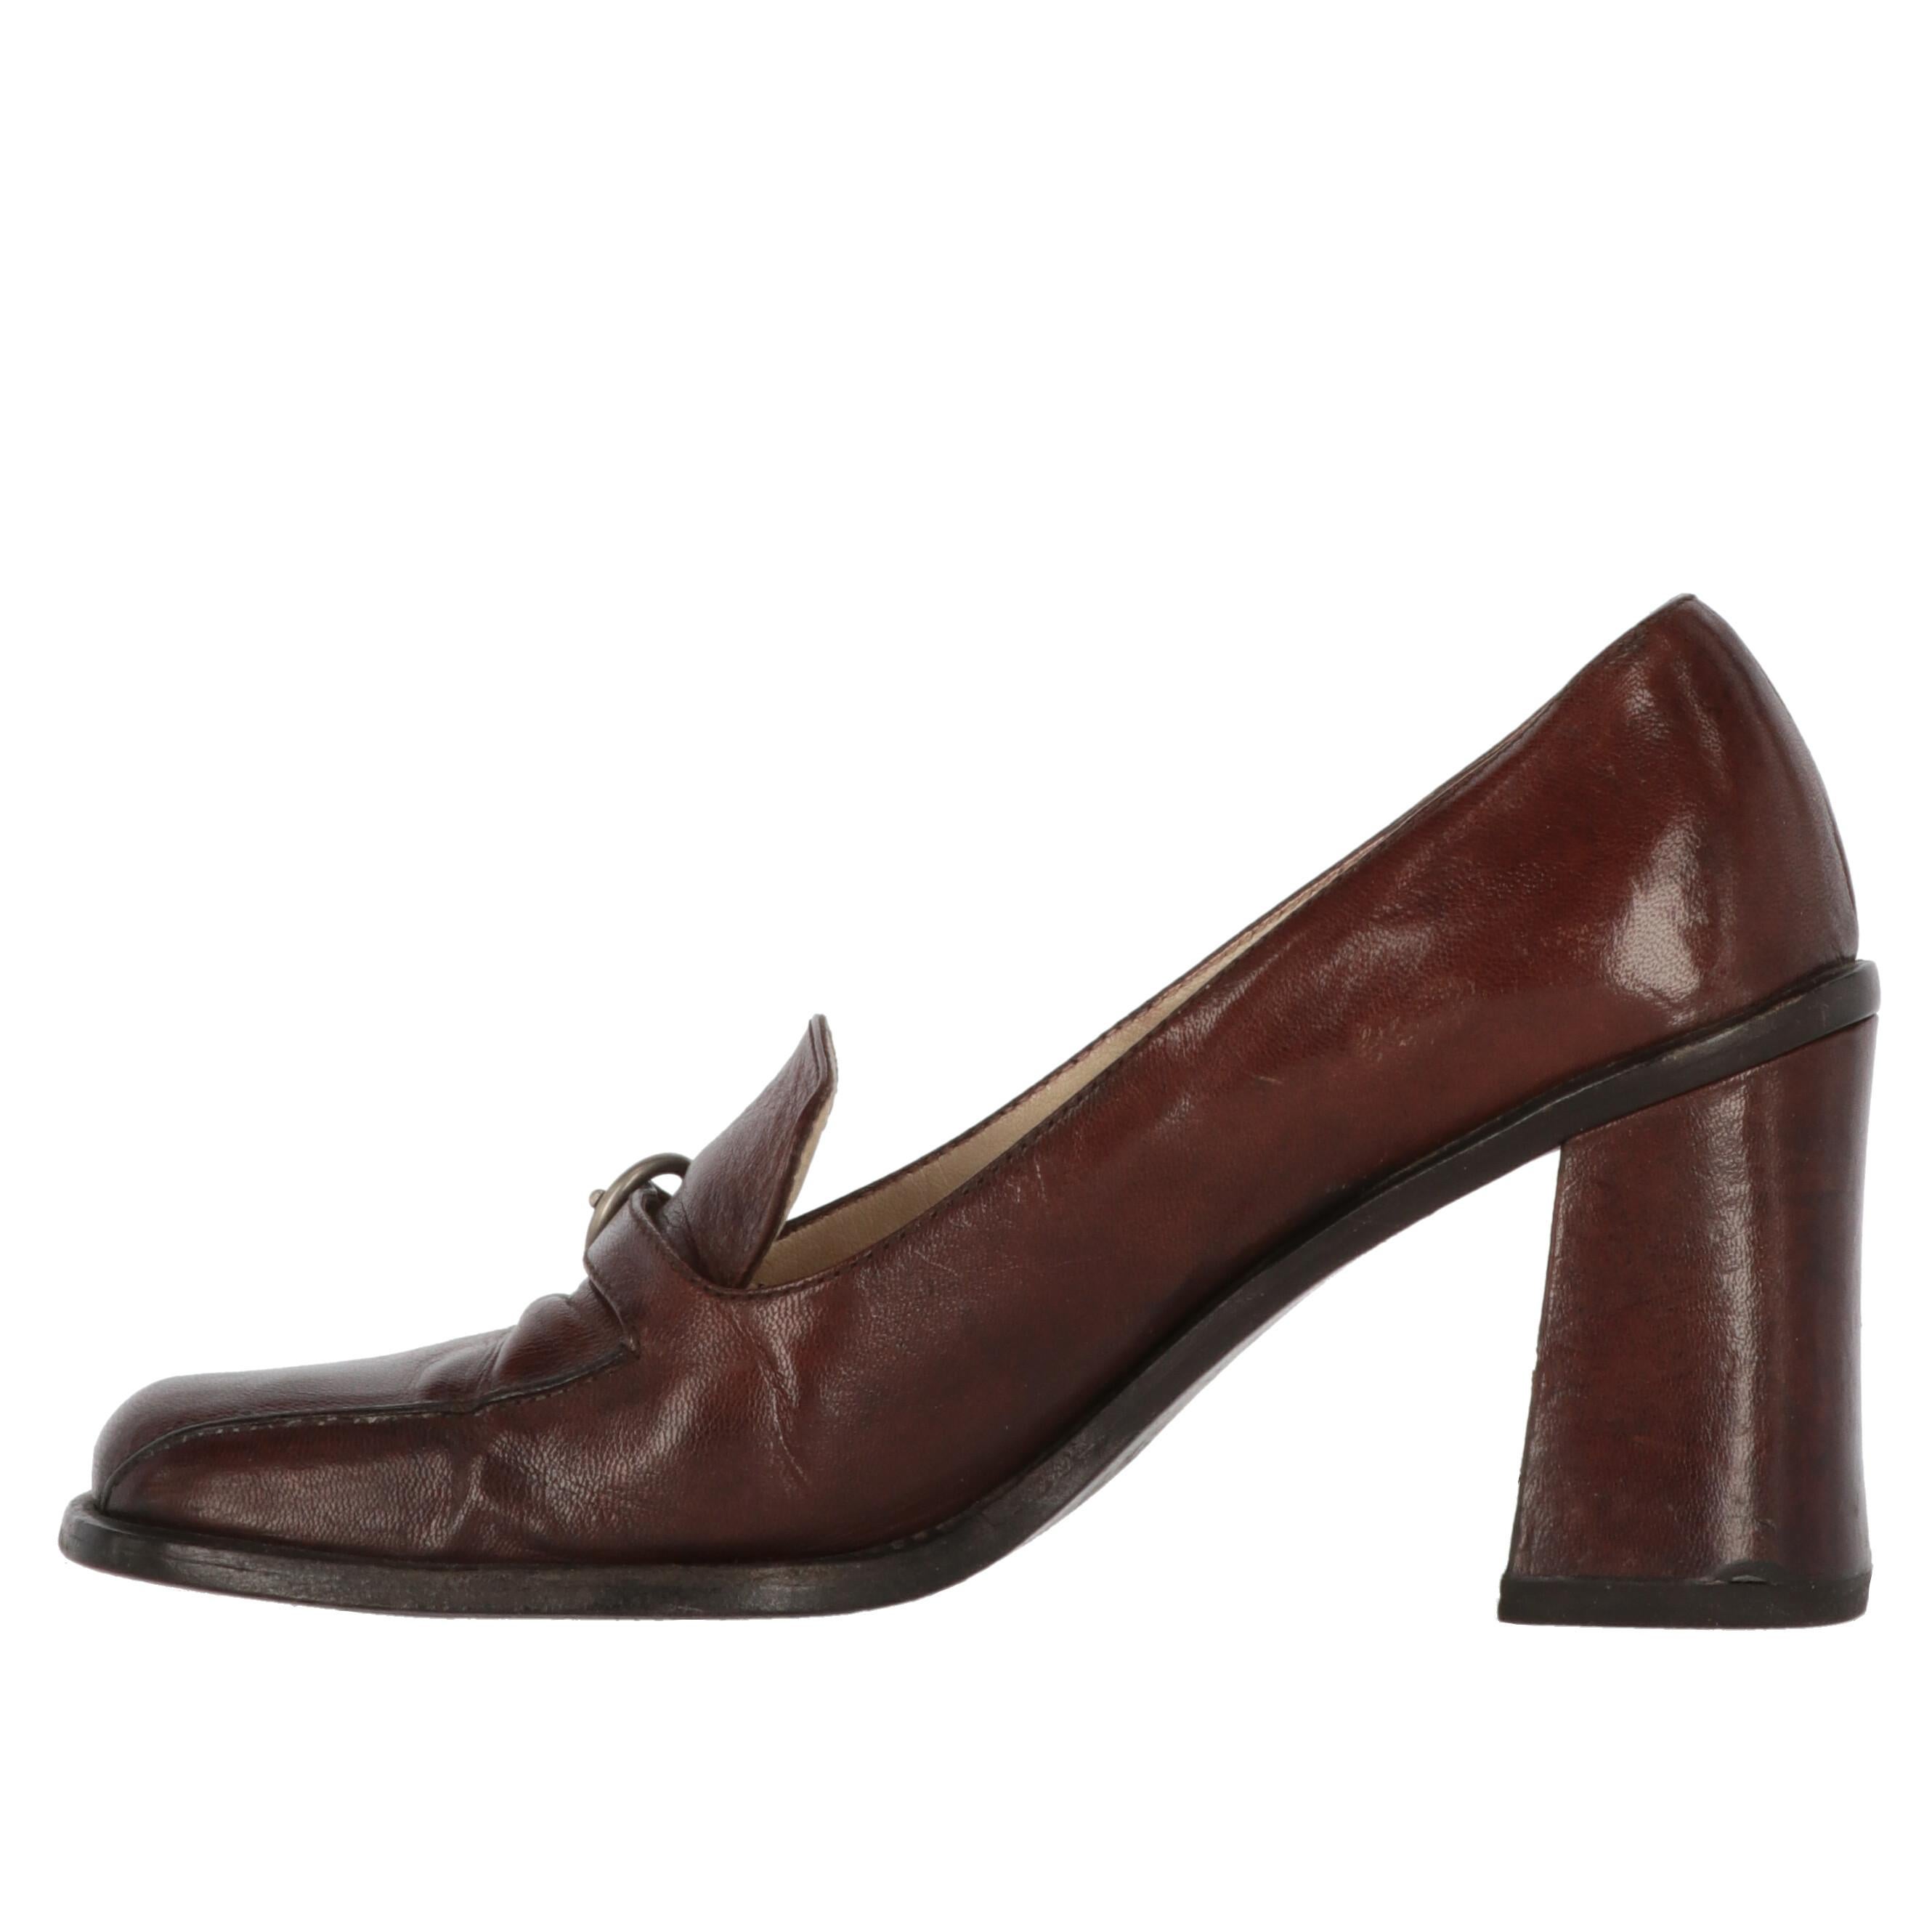 Brown genuine leather heeled loafers with strap and buckle, a sophisticated piece by Miu Miu. Square toe and chunky heel.
The shoes show signs of wear and wrinkles on the leather, and a halo on the as shown in the pictures.

Years: 2000s

Made in